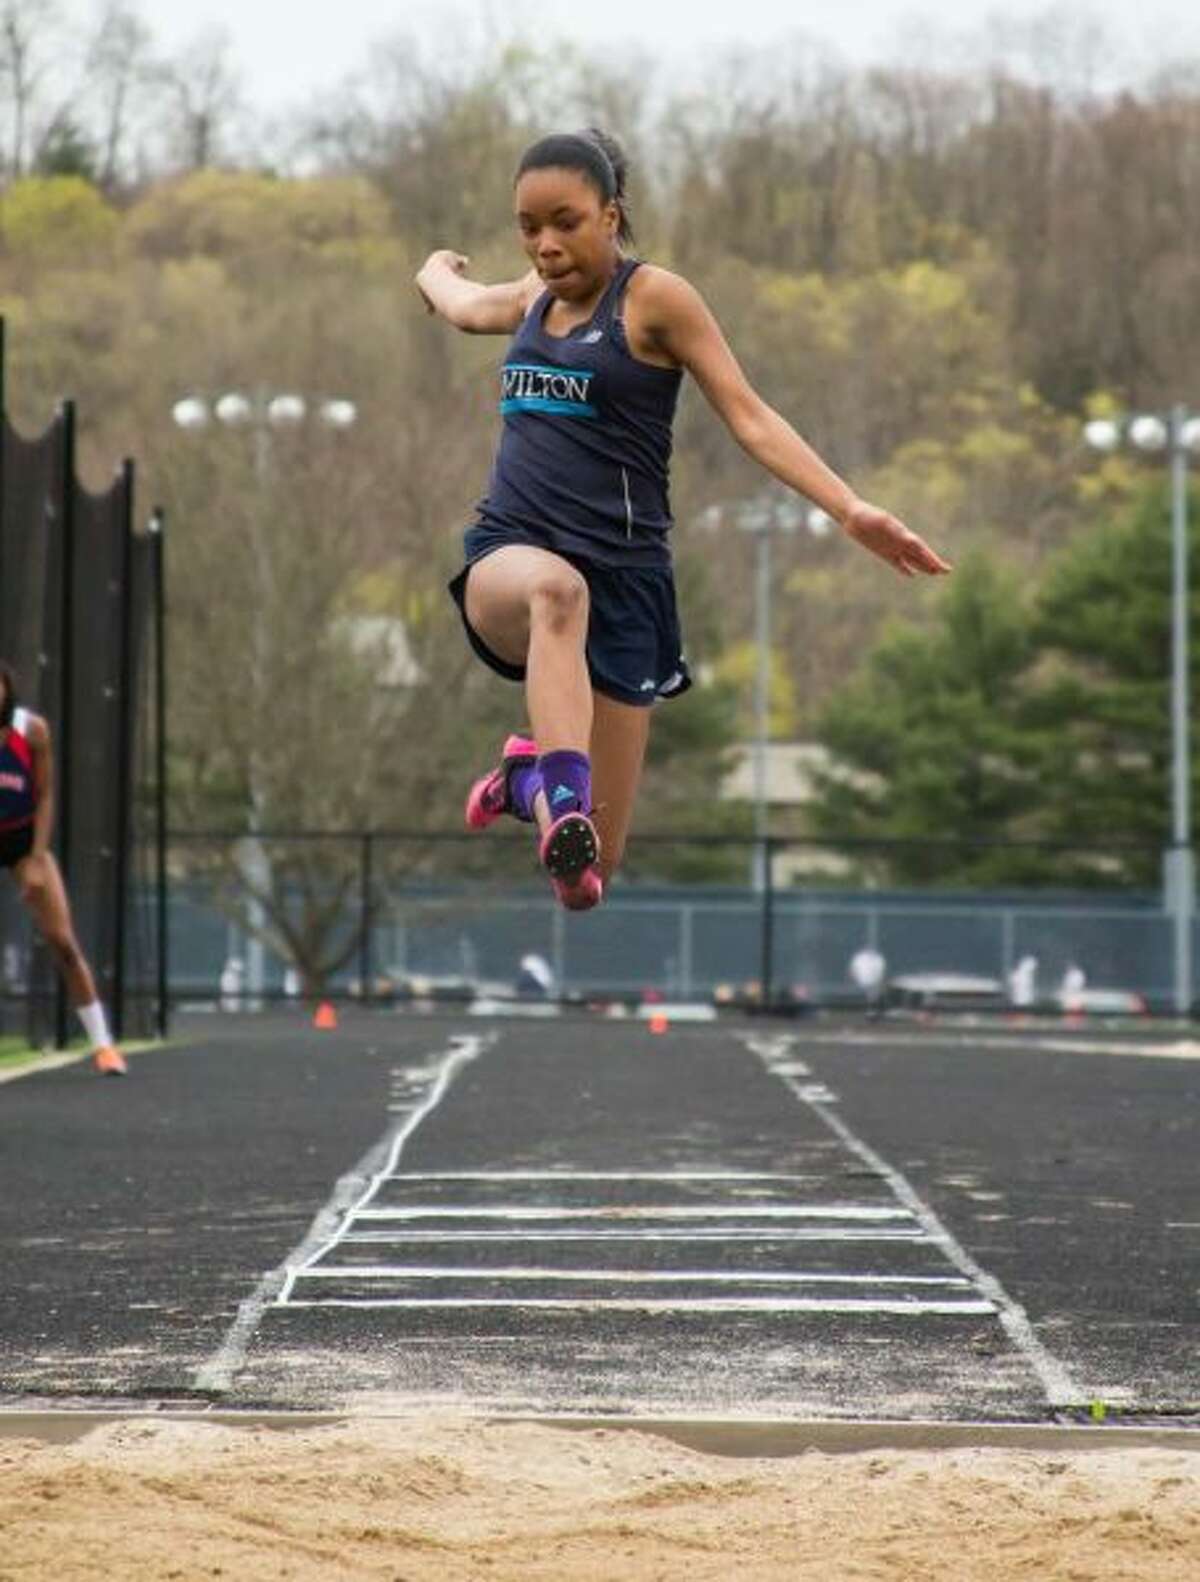 Andreen Reid, shown in action from last season, broke the Wilton High girls long jump for the second time this past Friday night. — GretchenMcMahonPhotography.com